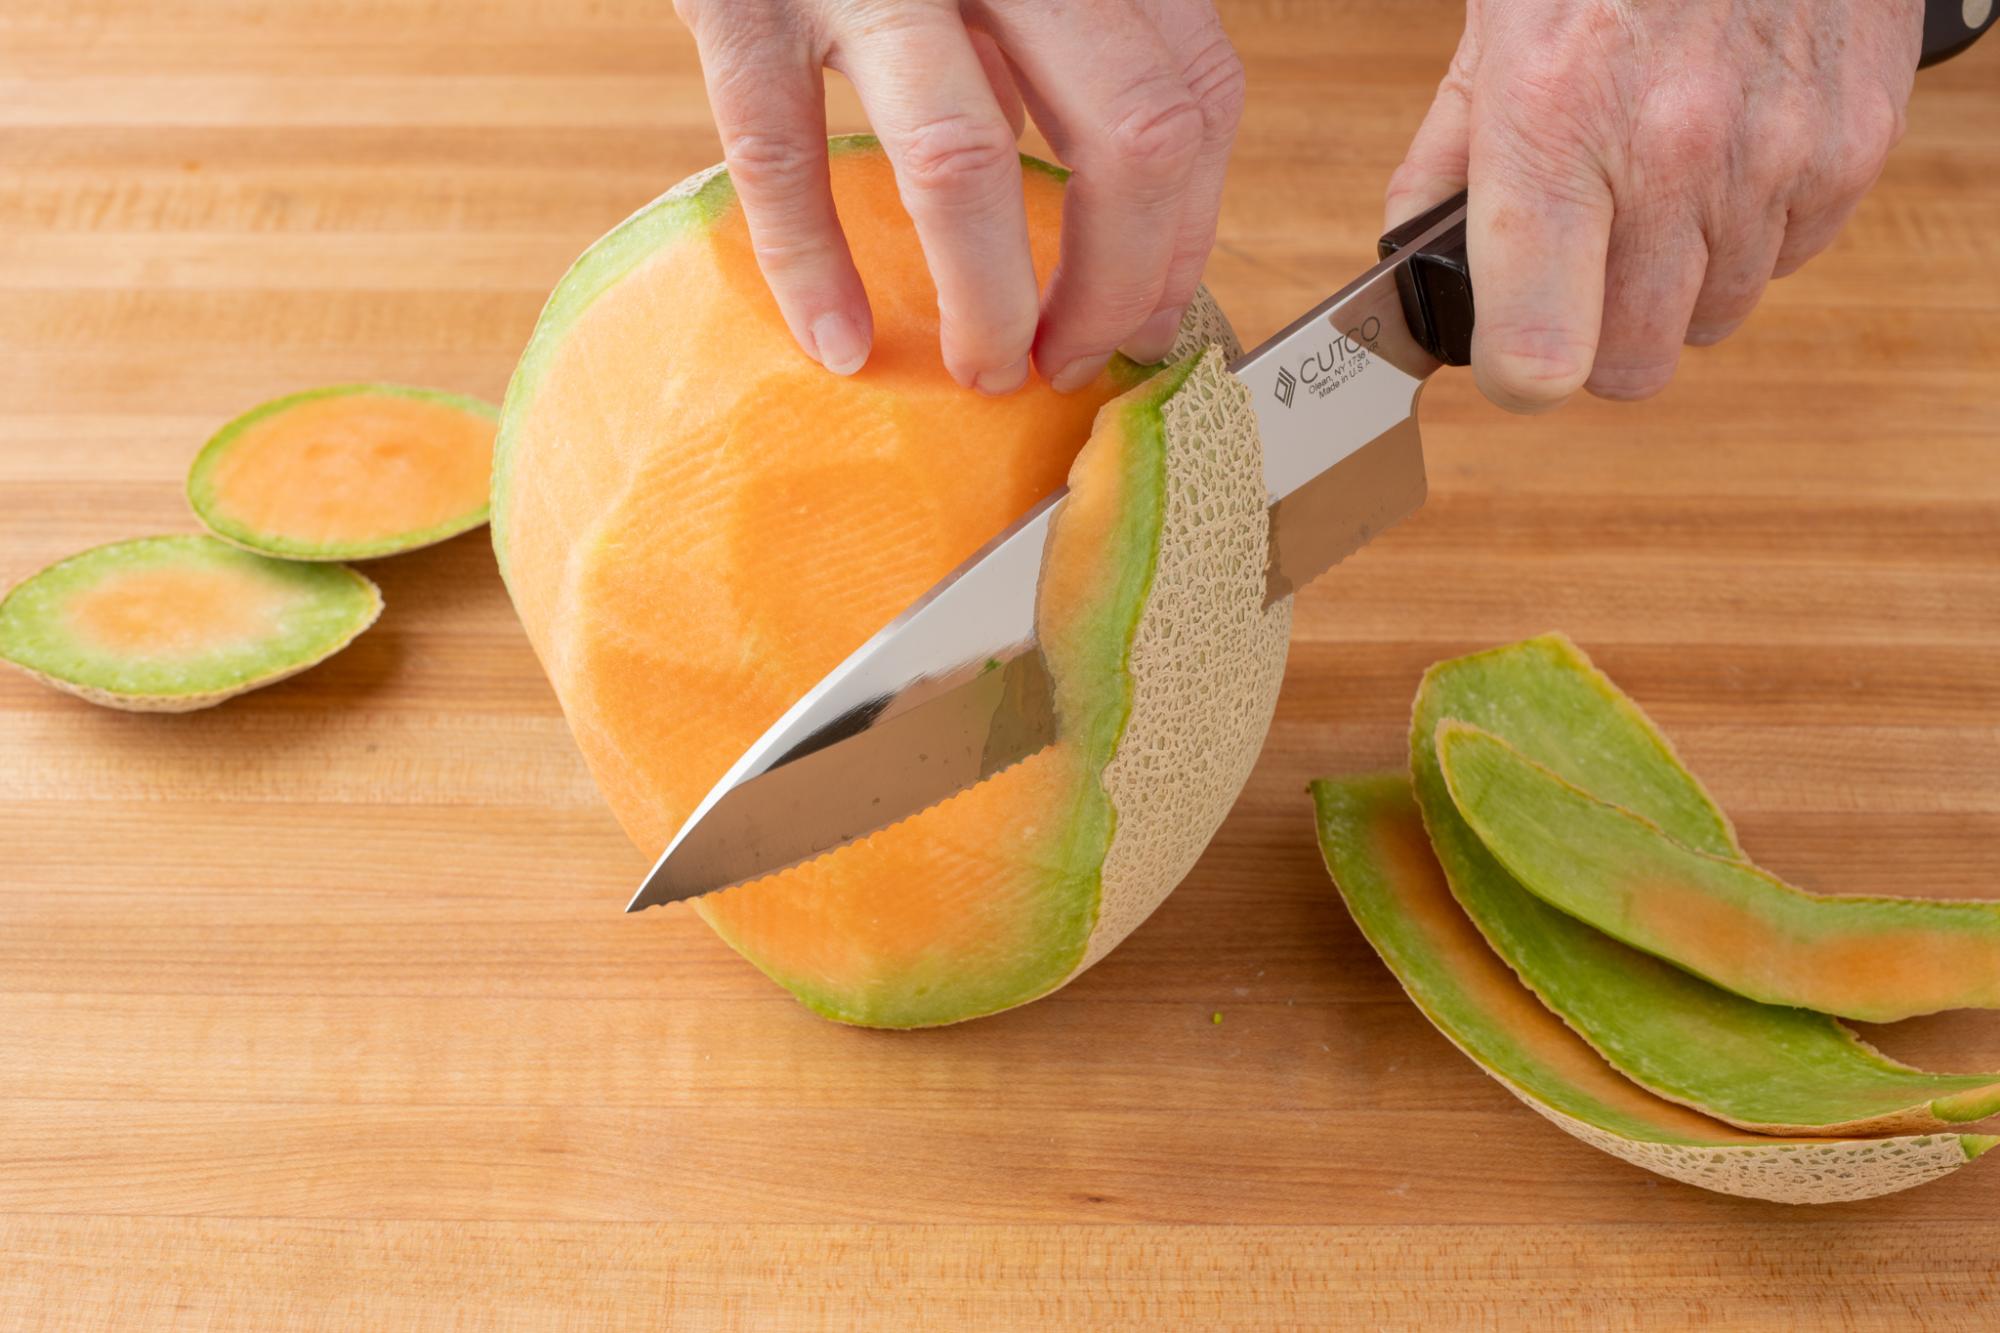 Using the Gourmet Prep Knife to remove the rind of the cantaloupe.